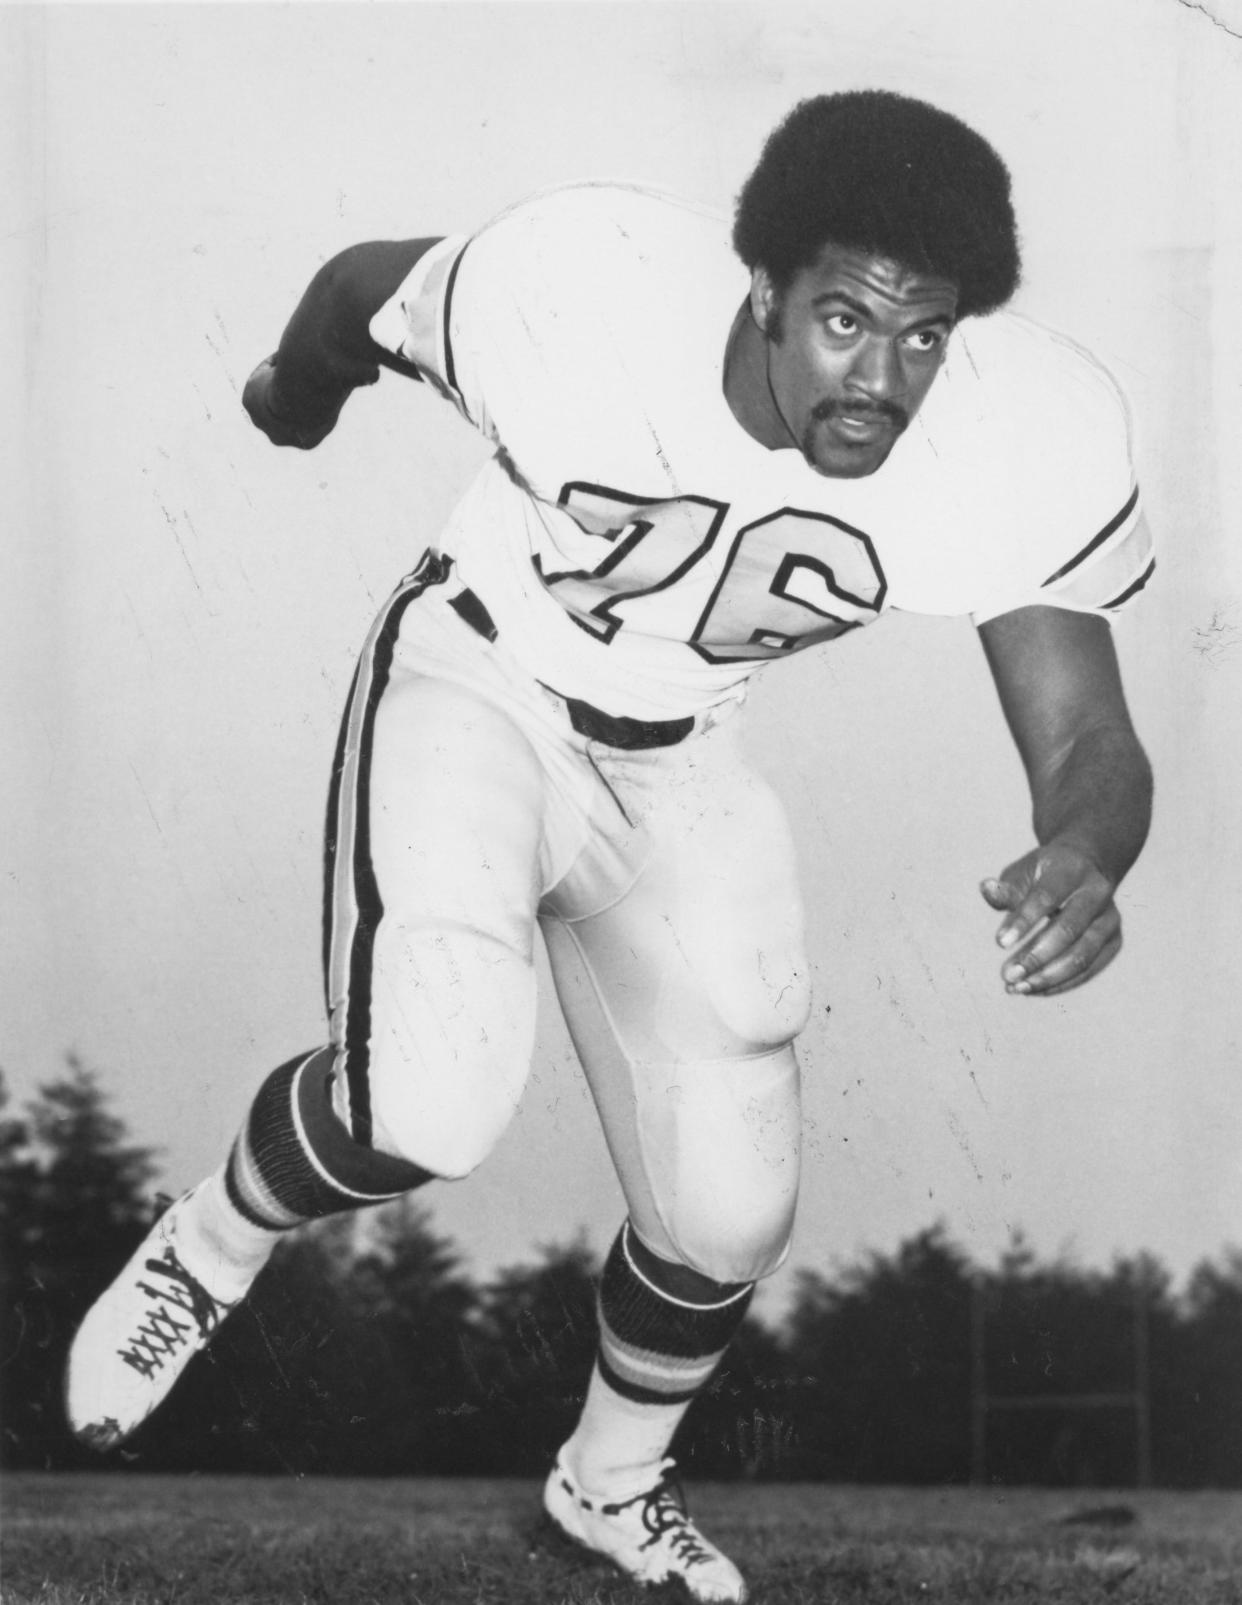 E.E. Smith 1974 graduate Larry Tearry went on to All-ACC football honors at Wake Forest and was a two-year starter at center for the NFL's Detroit Lions.